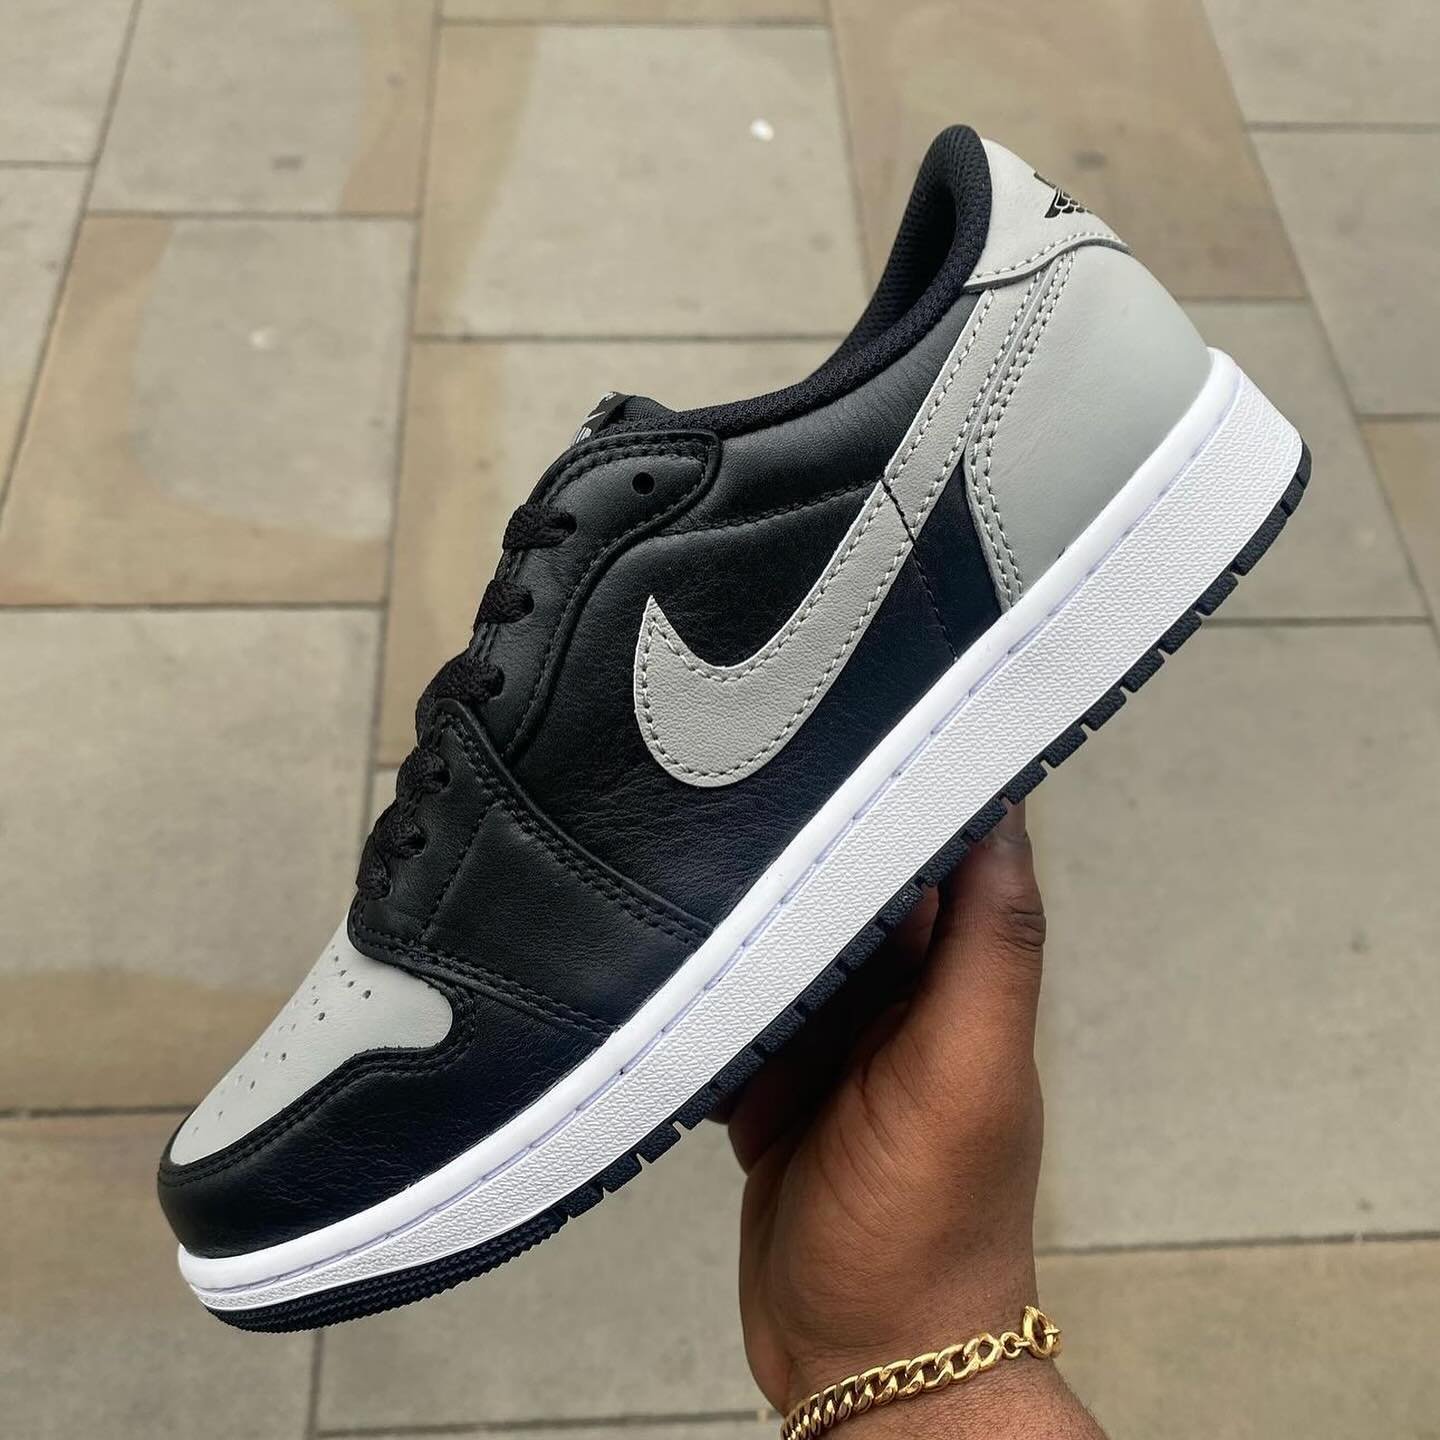 Nike&rsquo;s Air Jordan 1 Retro Low OG Shadow returns FRIDAY 10TH MAY 🤩

A pair for the low fans since they&rsquo;re last release in 2015! 

Follow @sneaker__spott for daily sneaker/style news! 

#SneakerSpott #AirJordan1Low